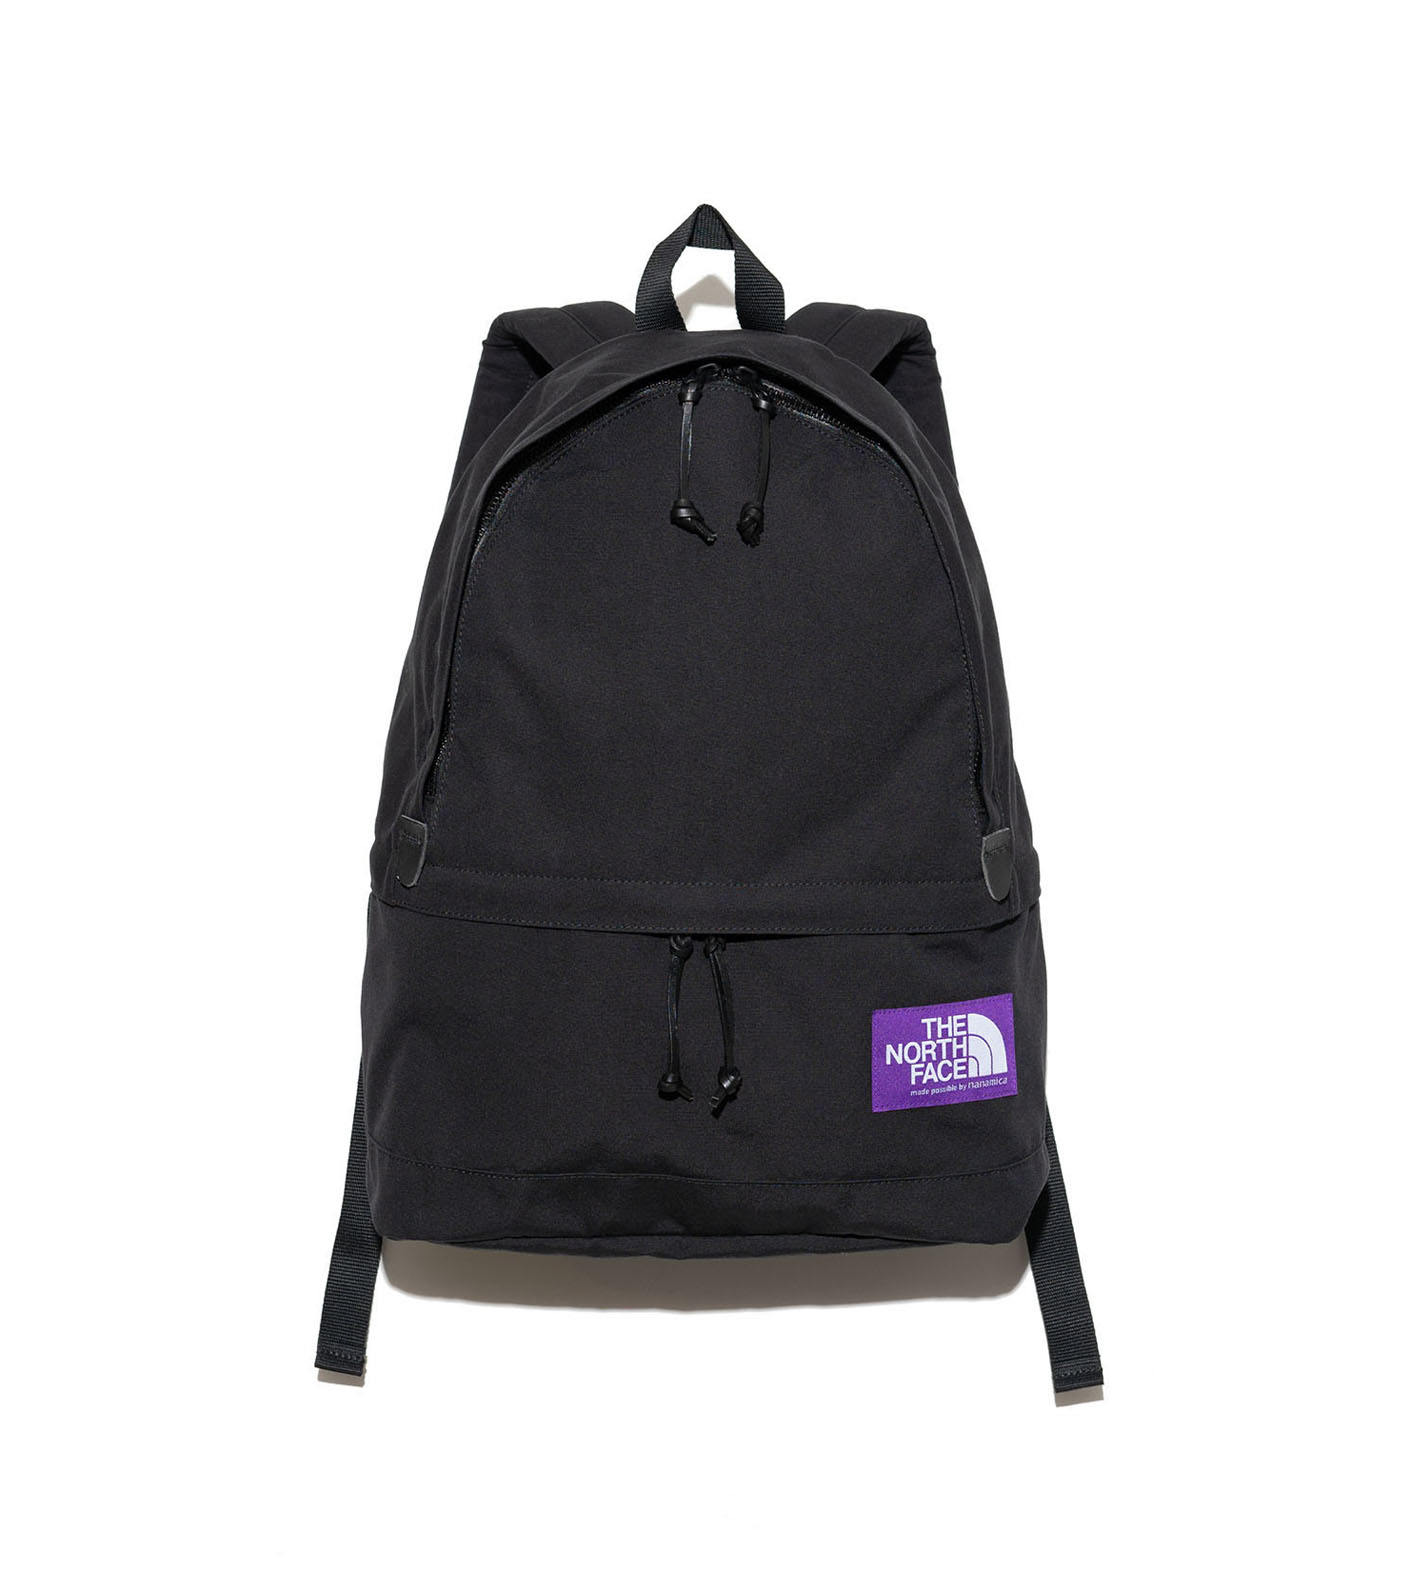 THE NORTH FACE PURPLE LABEL DayPack